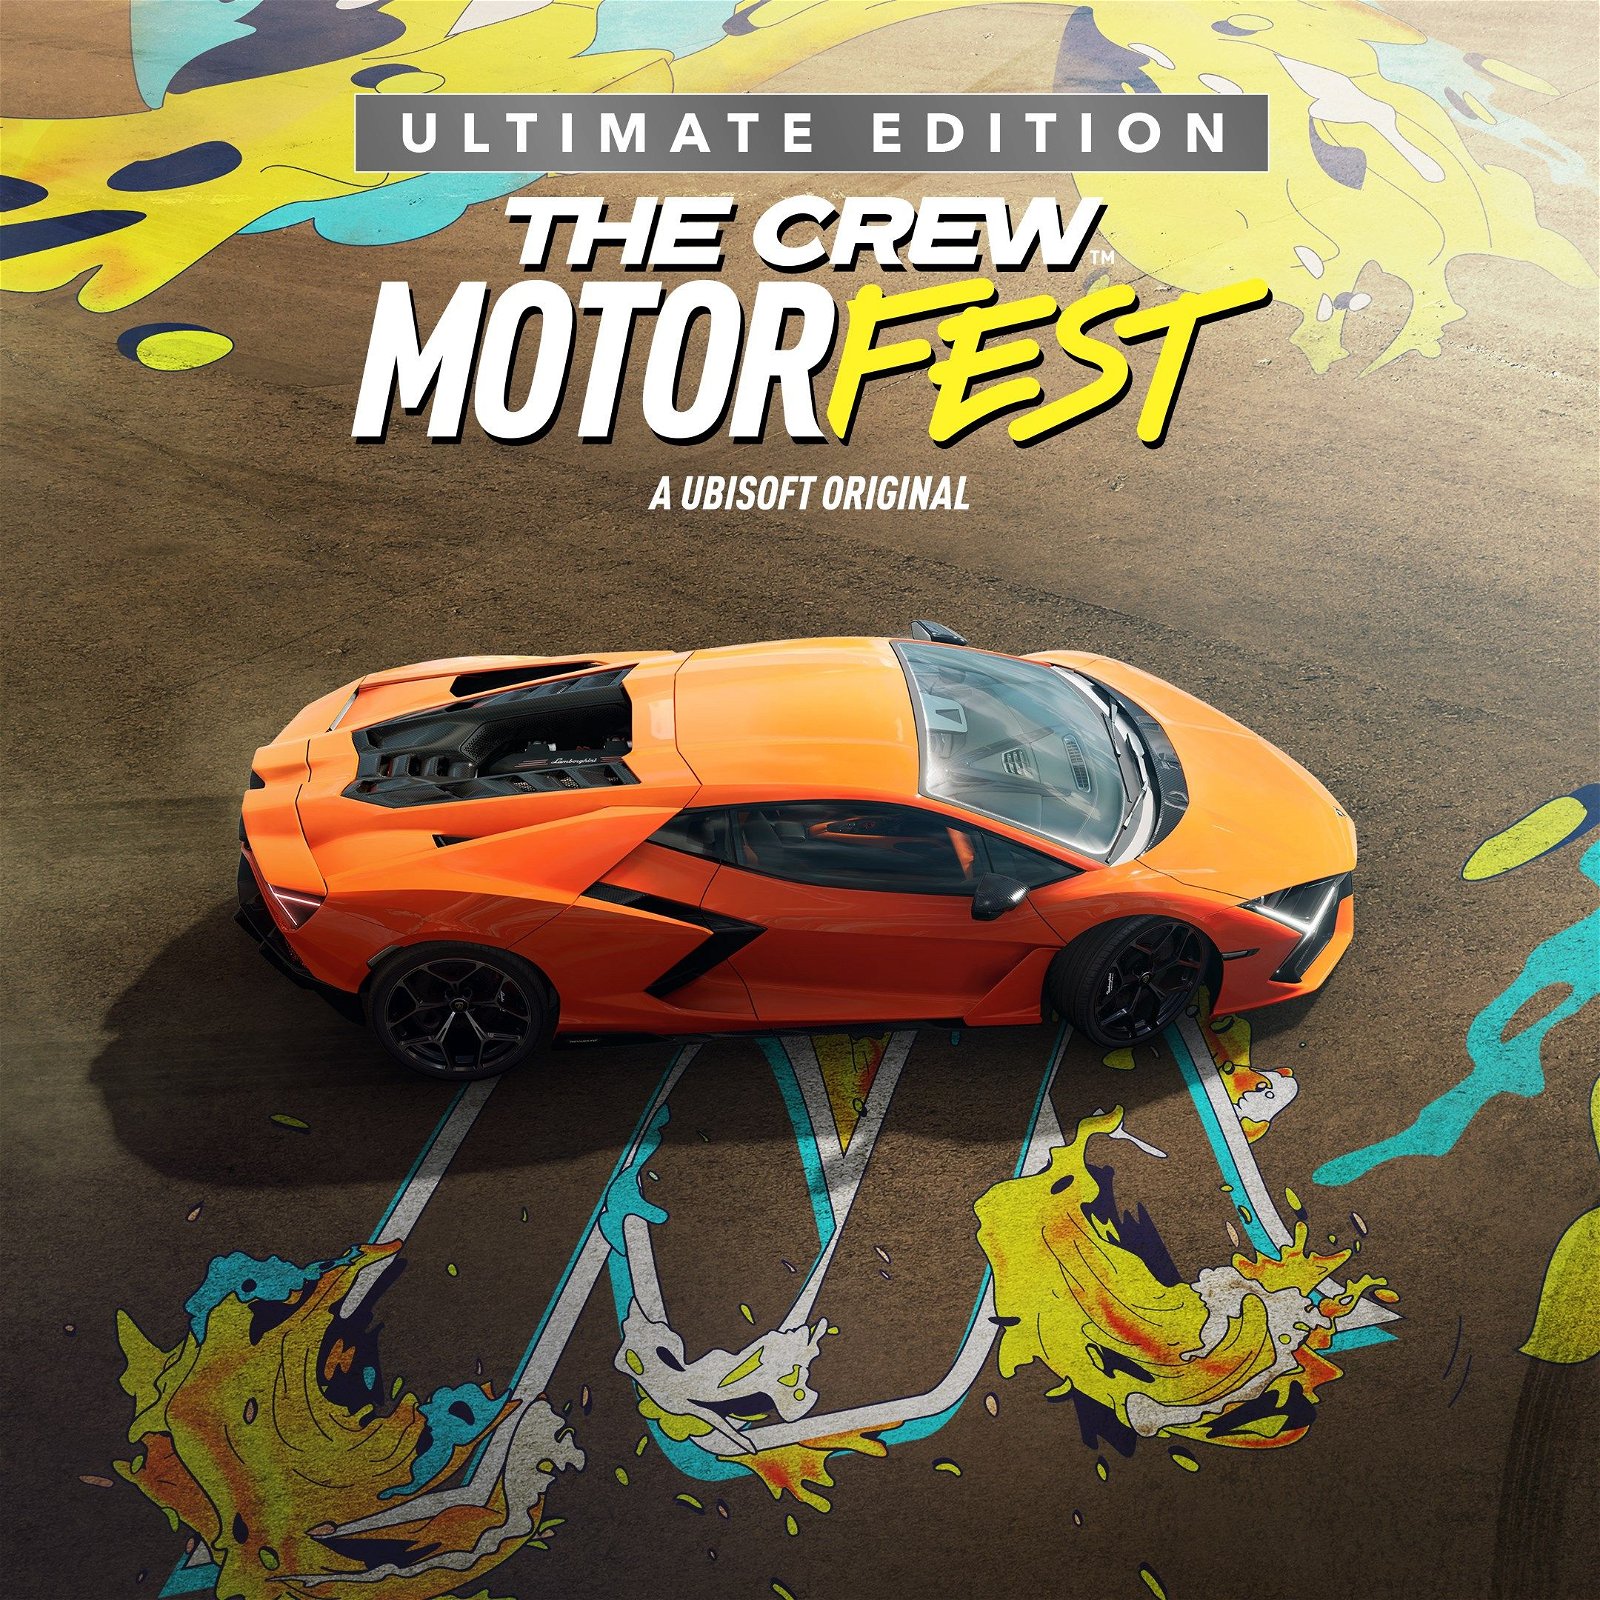 Image of The Crew Motorfest Ultimate Edition